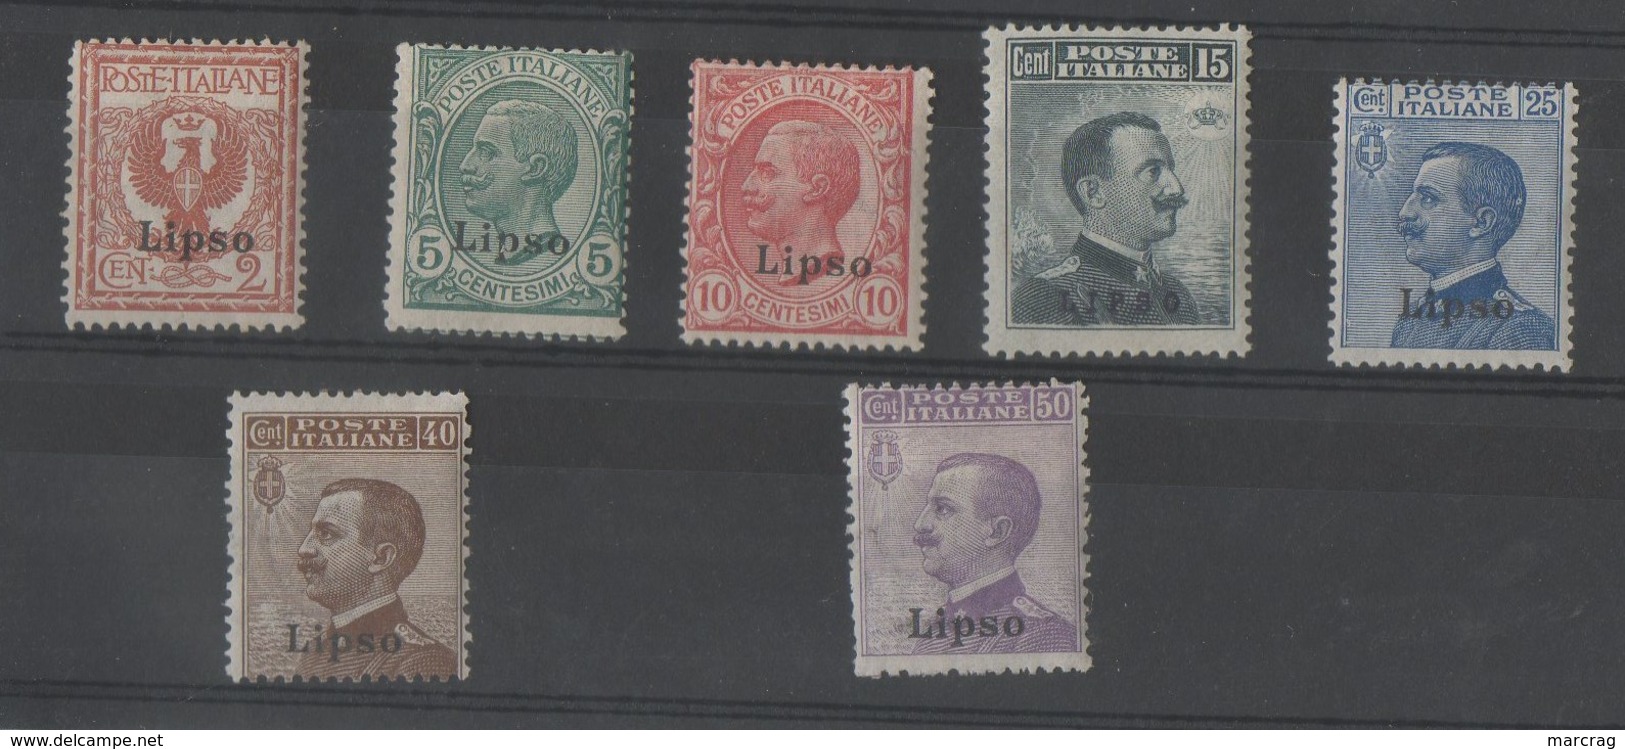 TIMBRES AVEC CHARNIERES OCCUPATION ITALIENNE - Ägäis (Lipso)